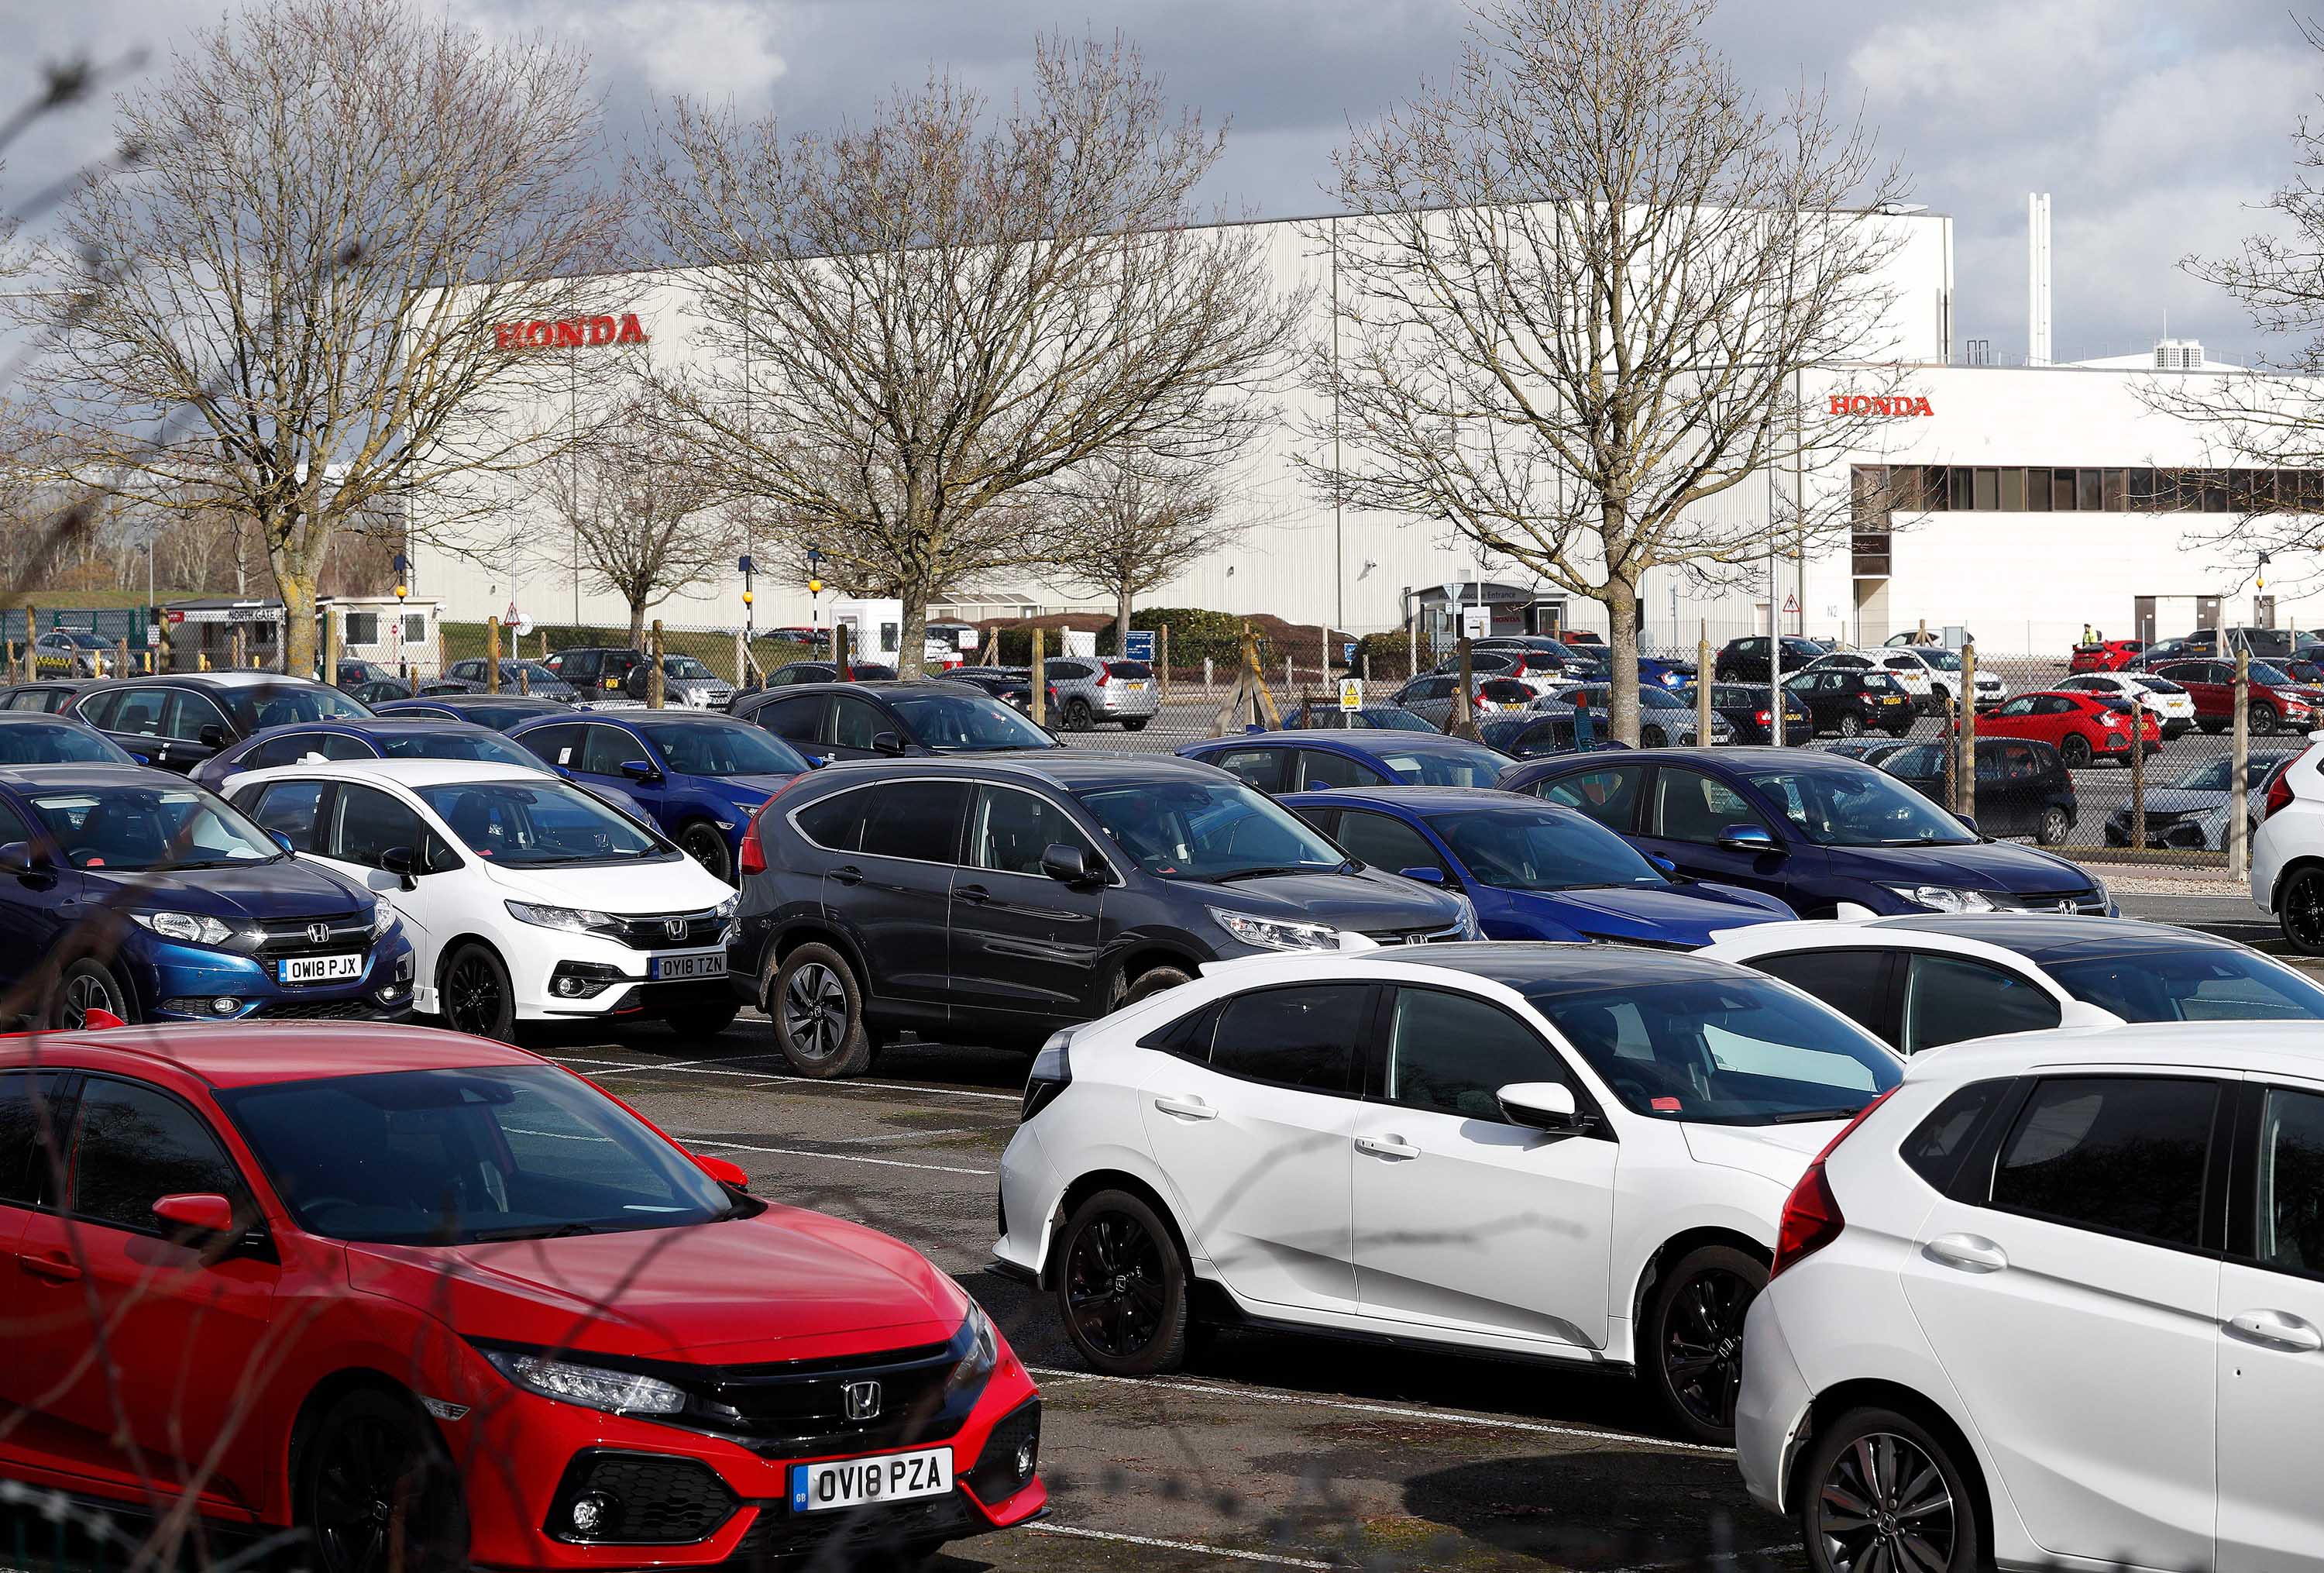 Honda shutdown is a warning of the chaos Brexit could cause Houston